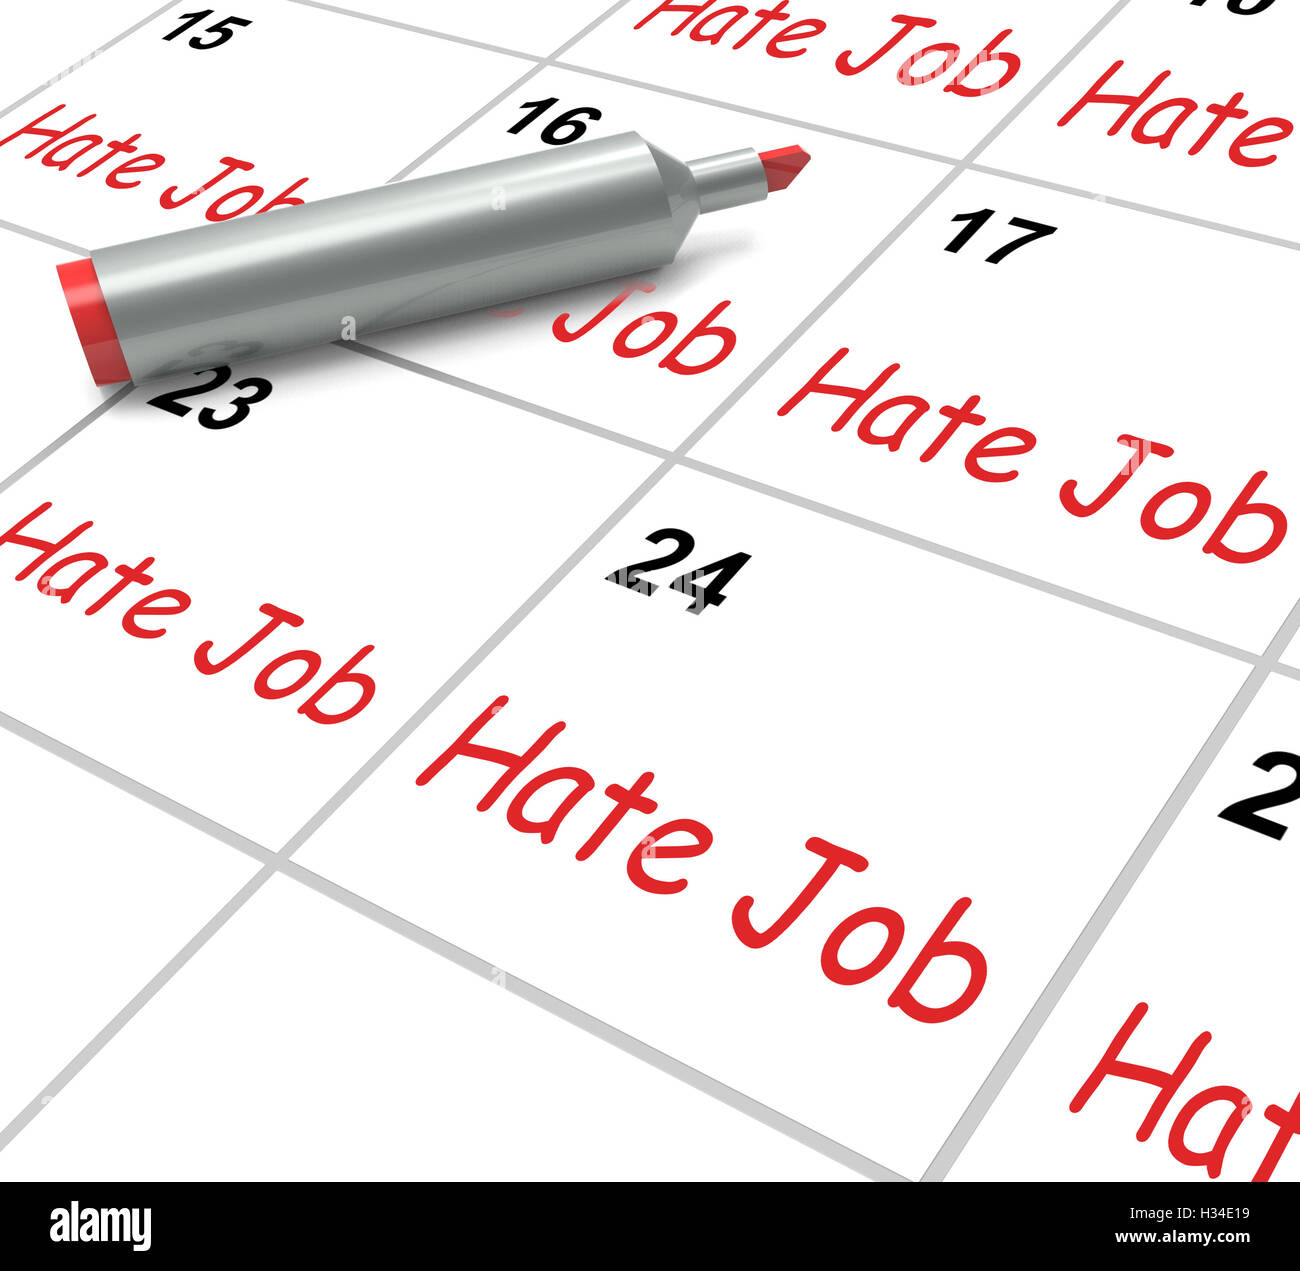 Hate Job Calendar Means Miserable At Work Stock Photo